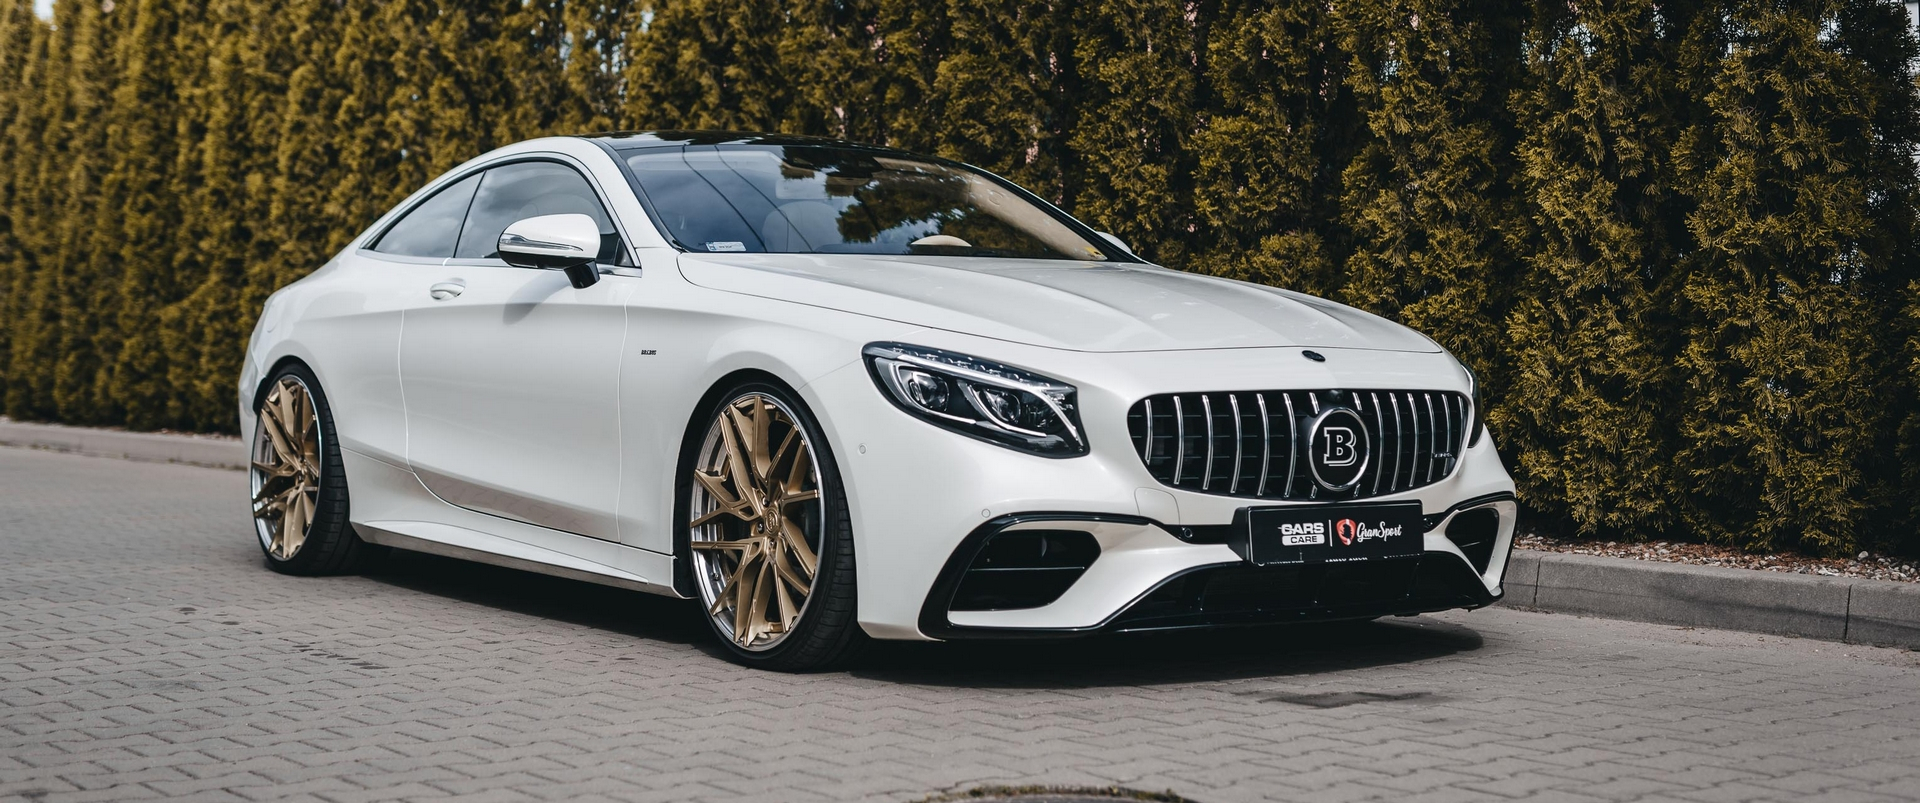 Mercedes S Coupe Maxhaust